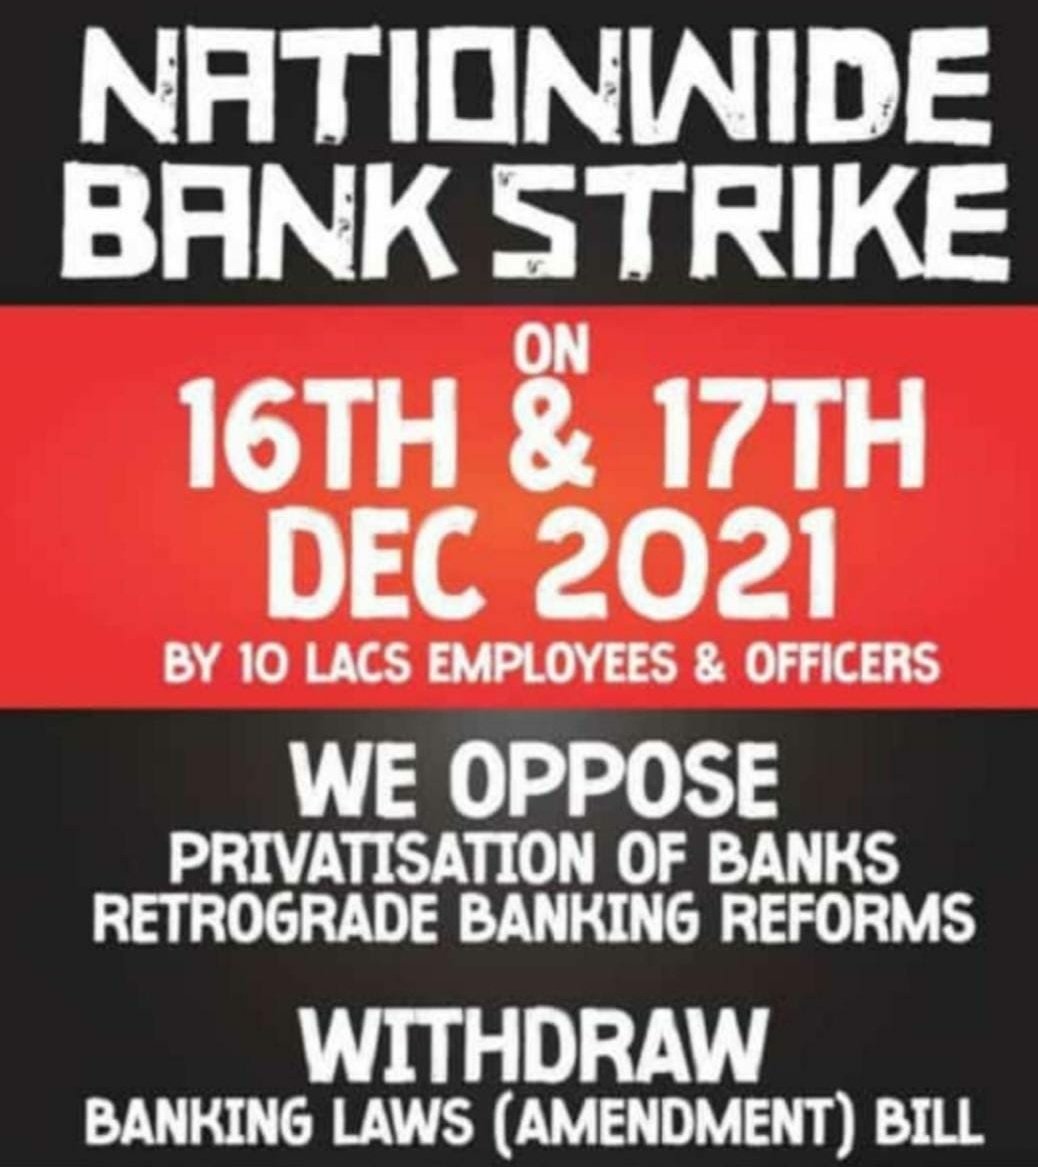 #BankBachao_DeshBachao
Comrades, 
Let's #StrikeHard ✊
Let's hit the streets again..
Let's stop injustice once again..
Let's bring revolution once again.. 
Let's save the nation from privatization once again.. ✊
#StopPrivatizationofBanks
#BankersOnStrike 📢
#StopPrivatization 🚫